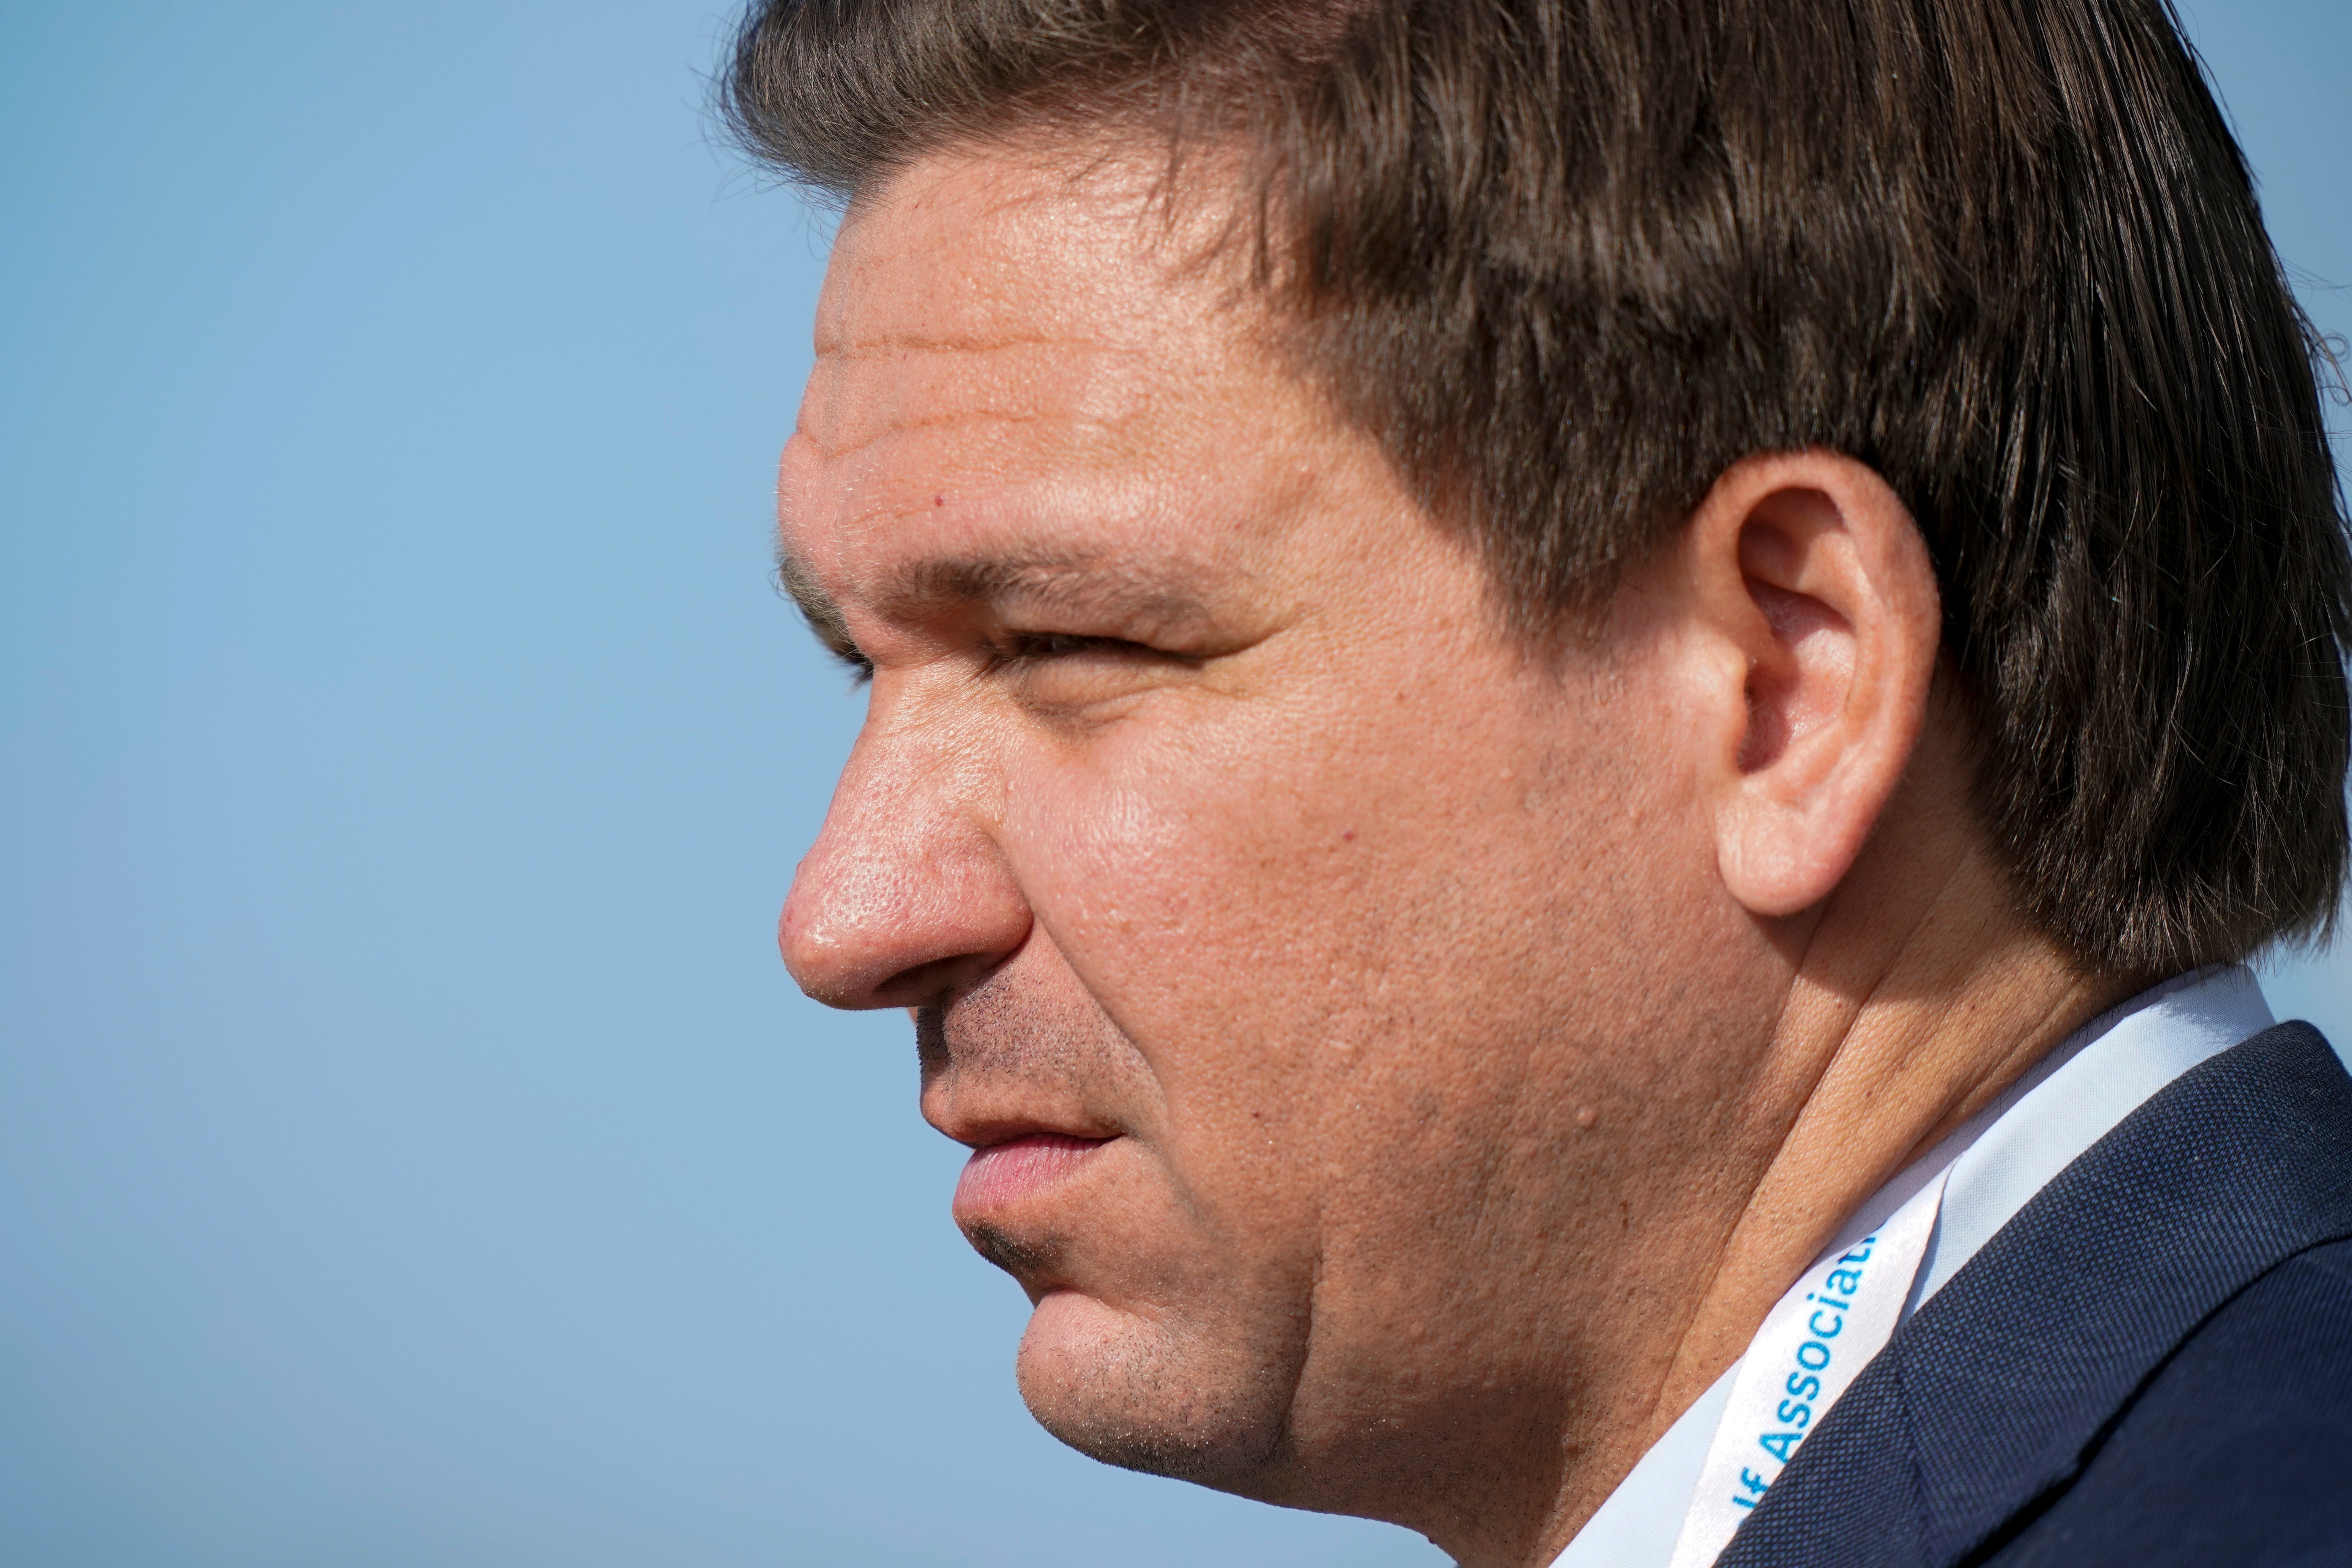 A ‘vaccine passport’ ban signed by Governor Ron DeSantis is getting in the way of cruise companies’ return to business